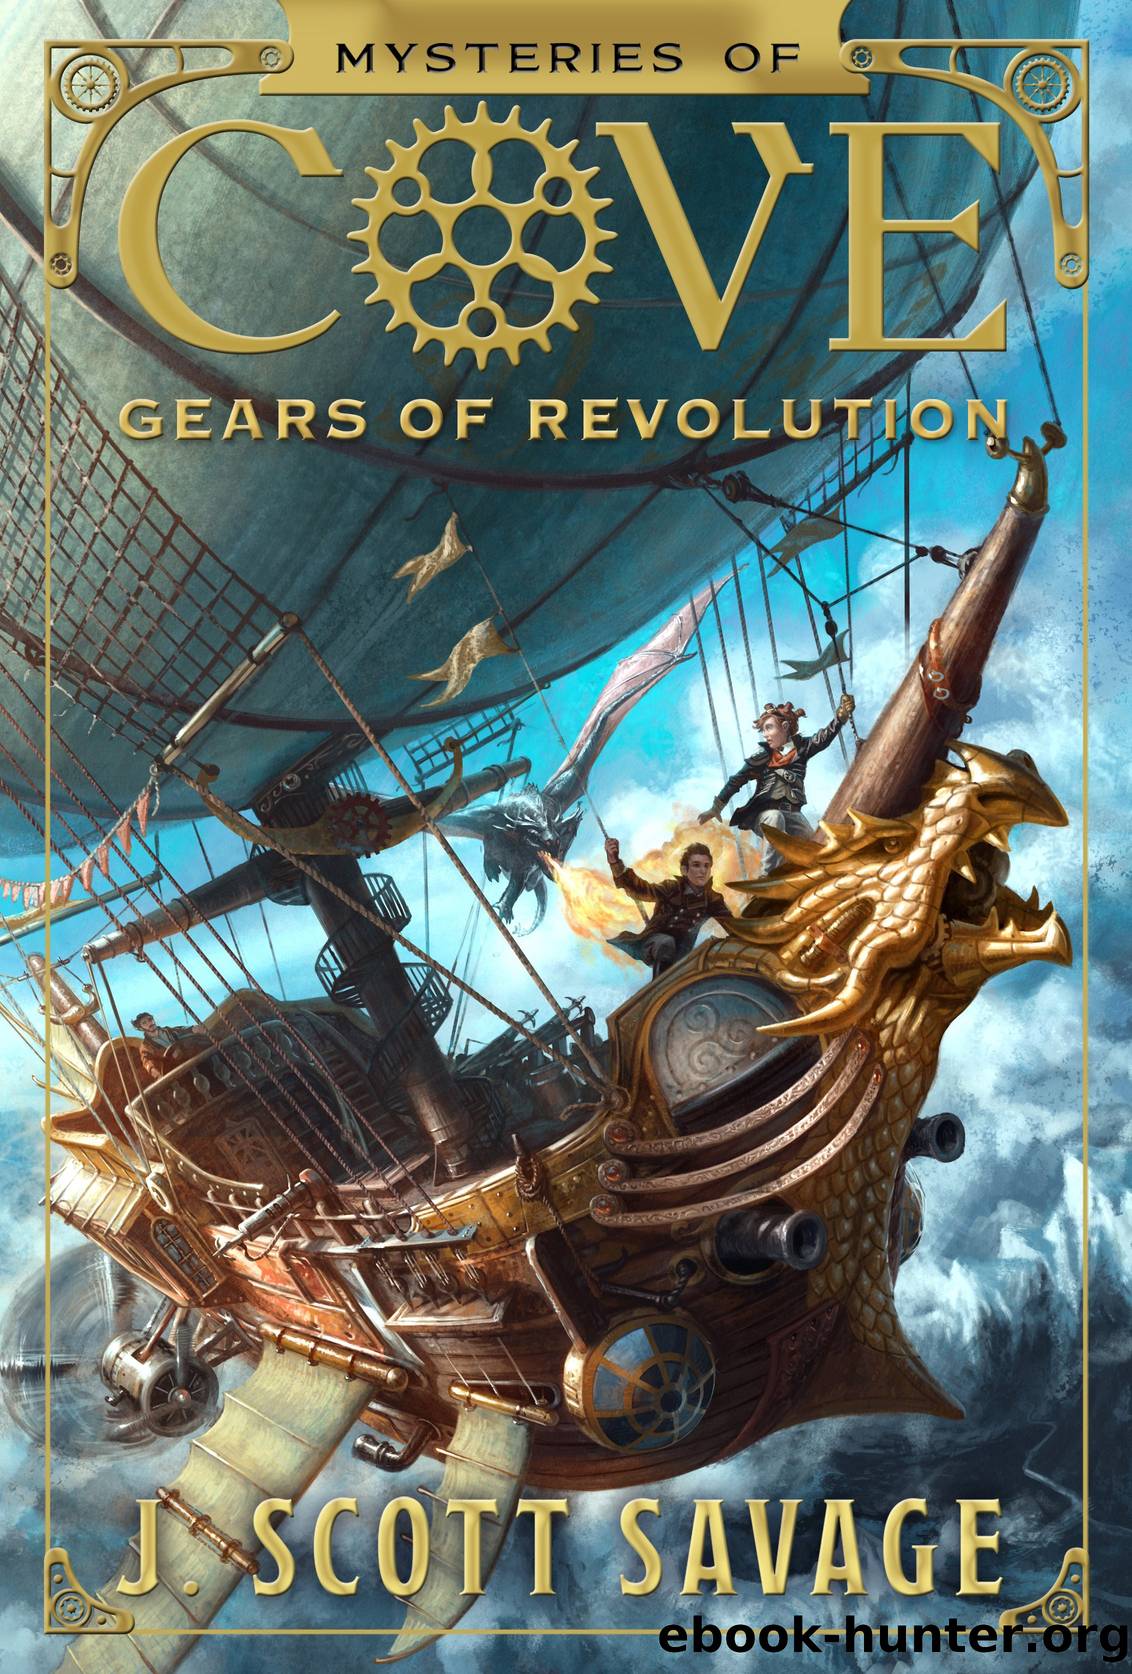 Mysteries of Cove, Volume 2: Gears of Revolution by J. Scott Savage